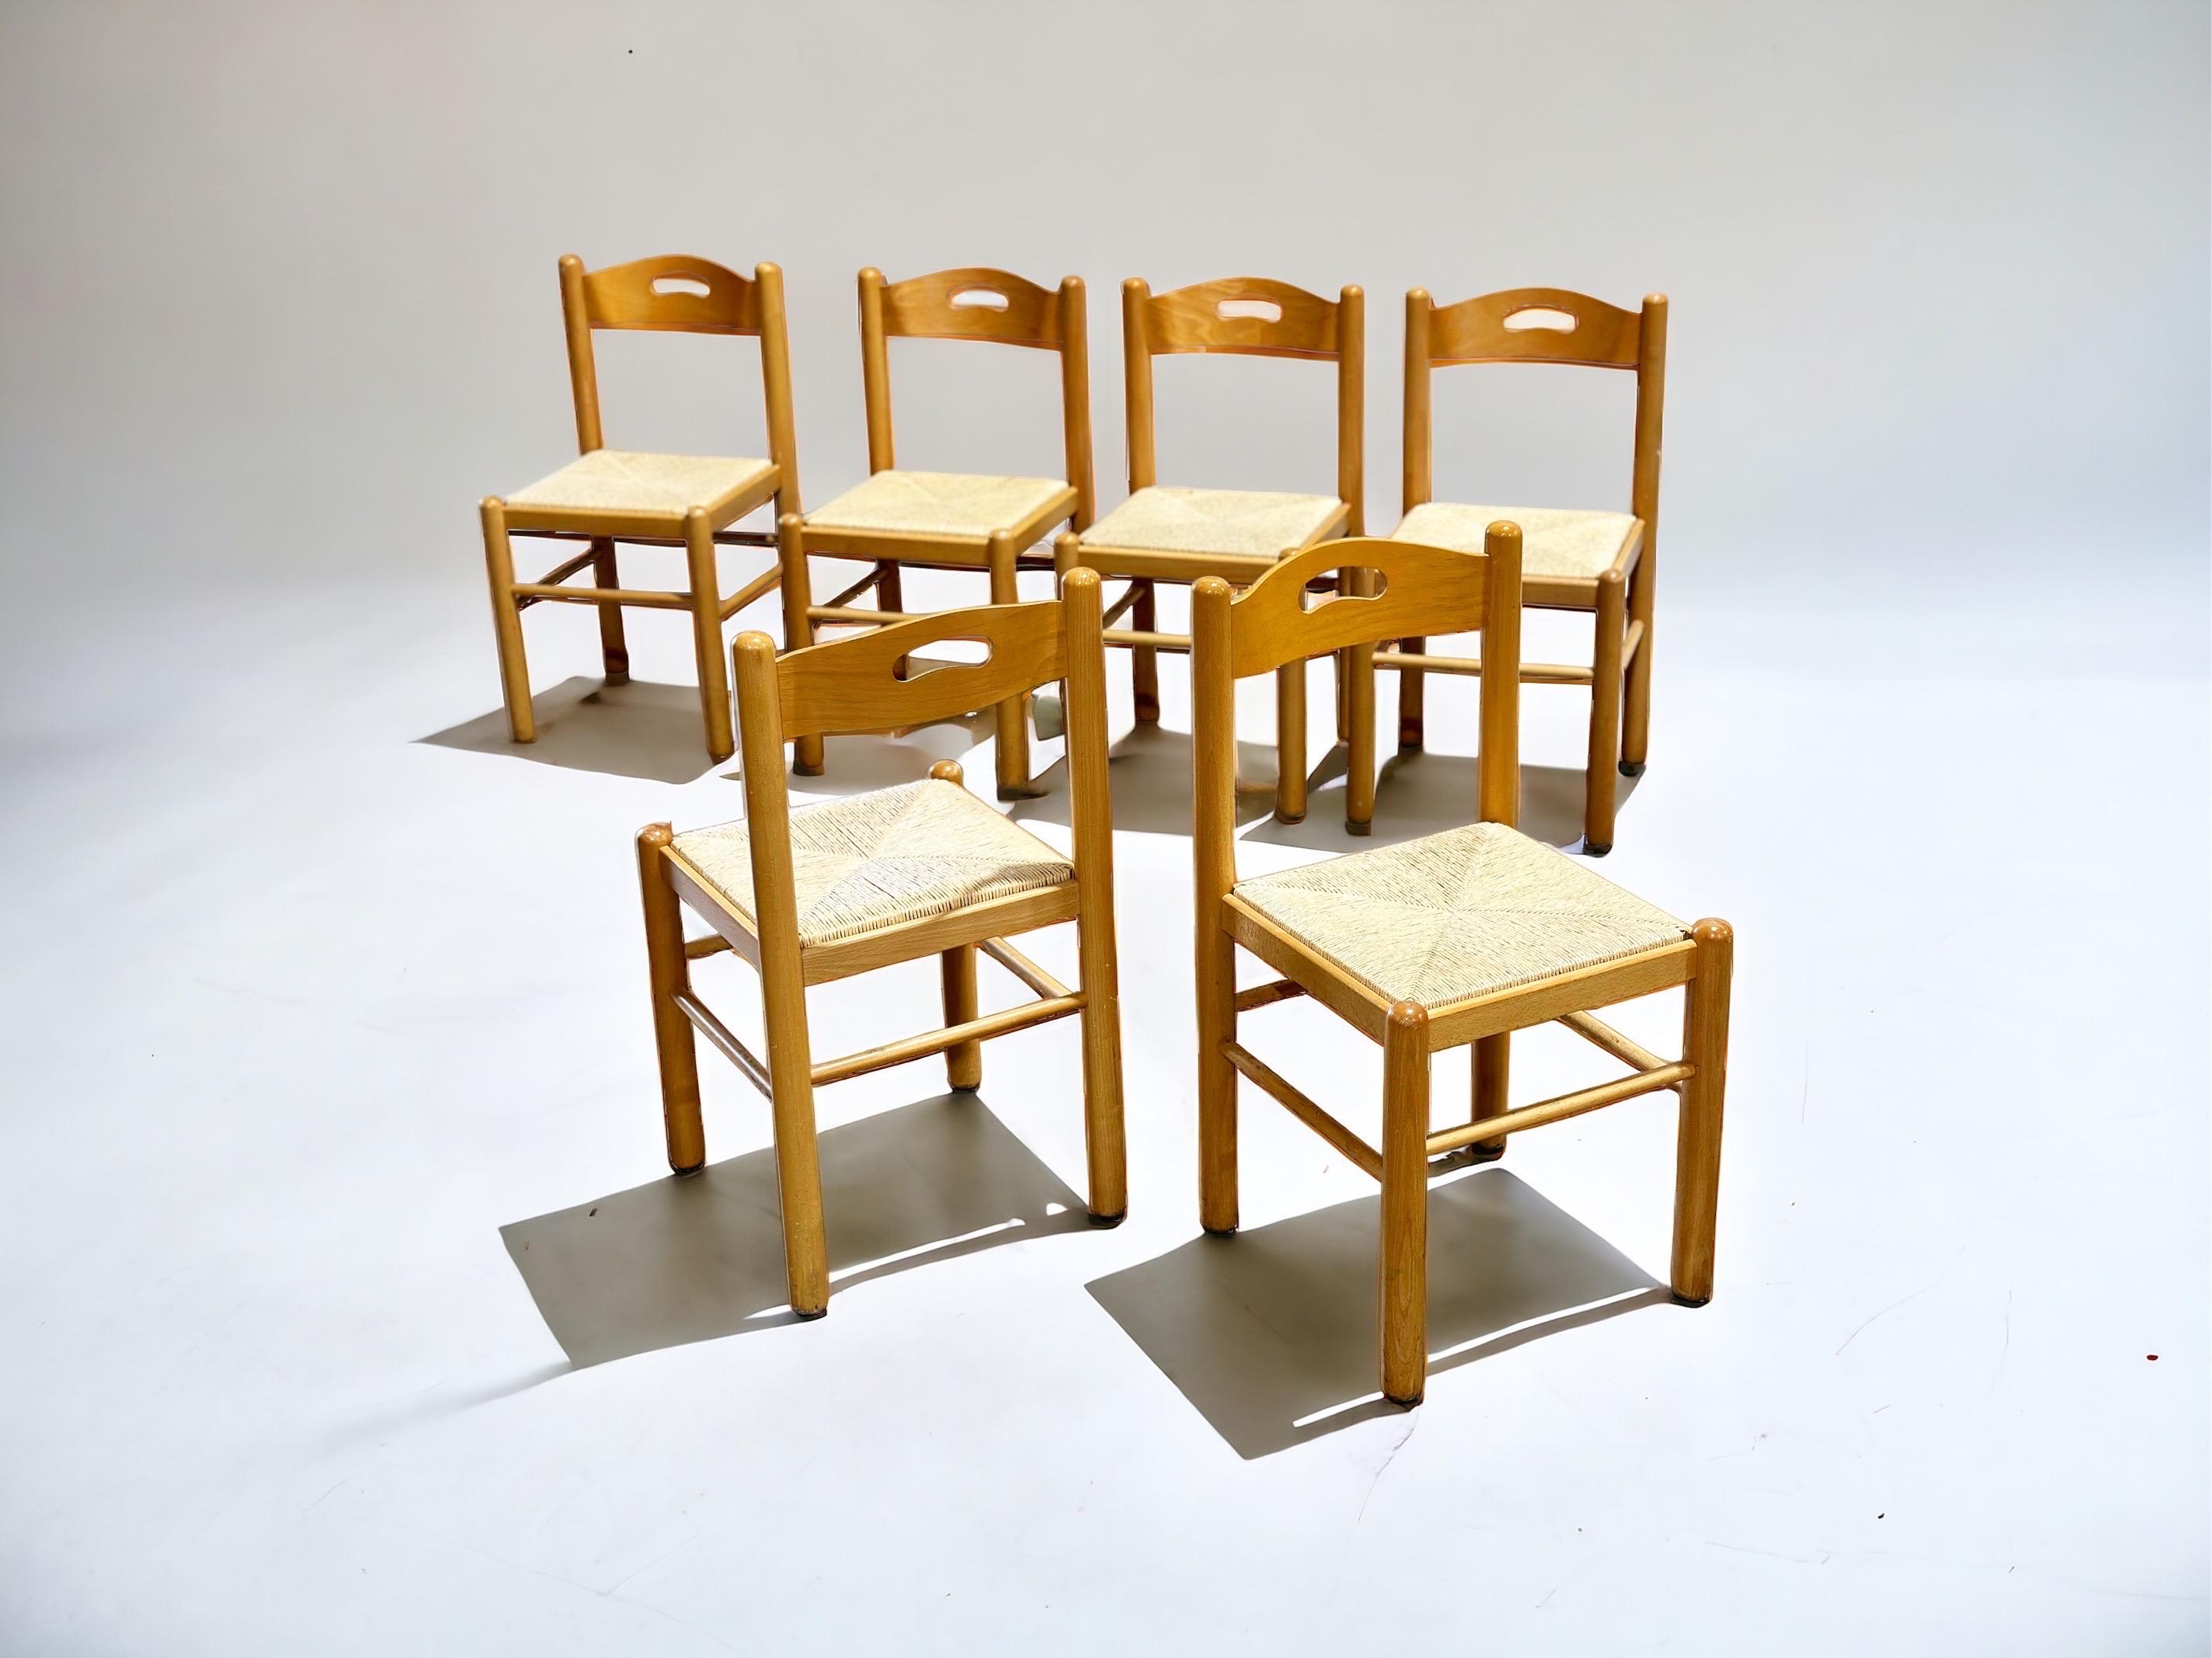 Organic Modern Dining Chairs - Birch + Rush - Italy circa 1980s - Set of Six For Sale 3